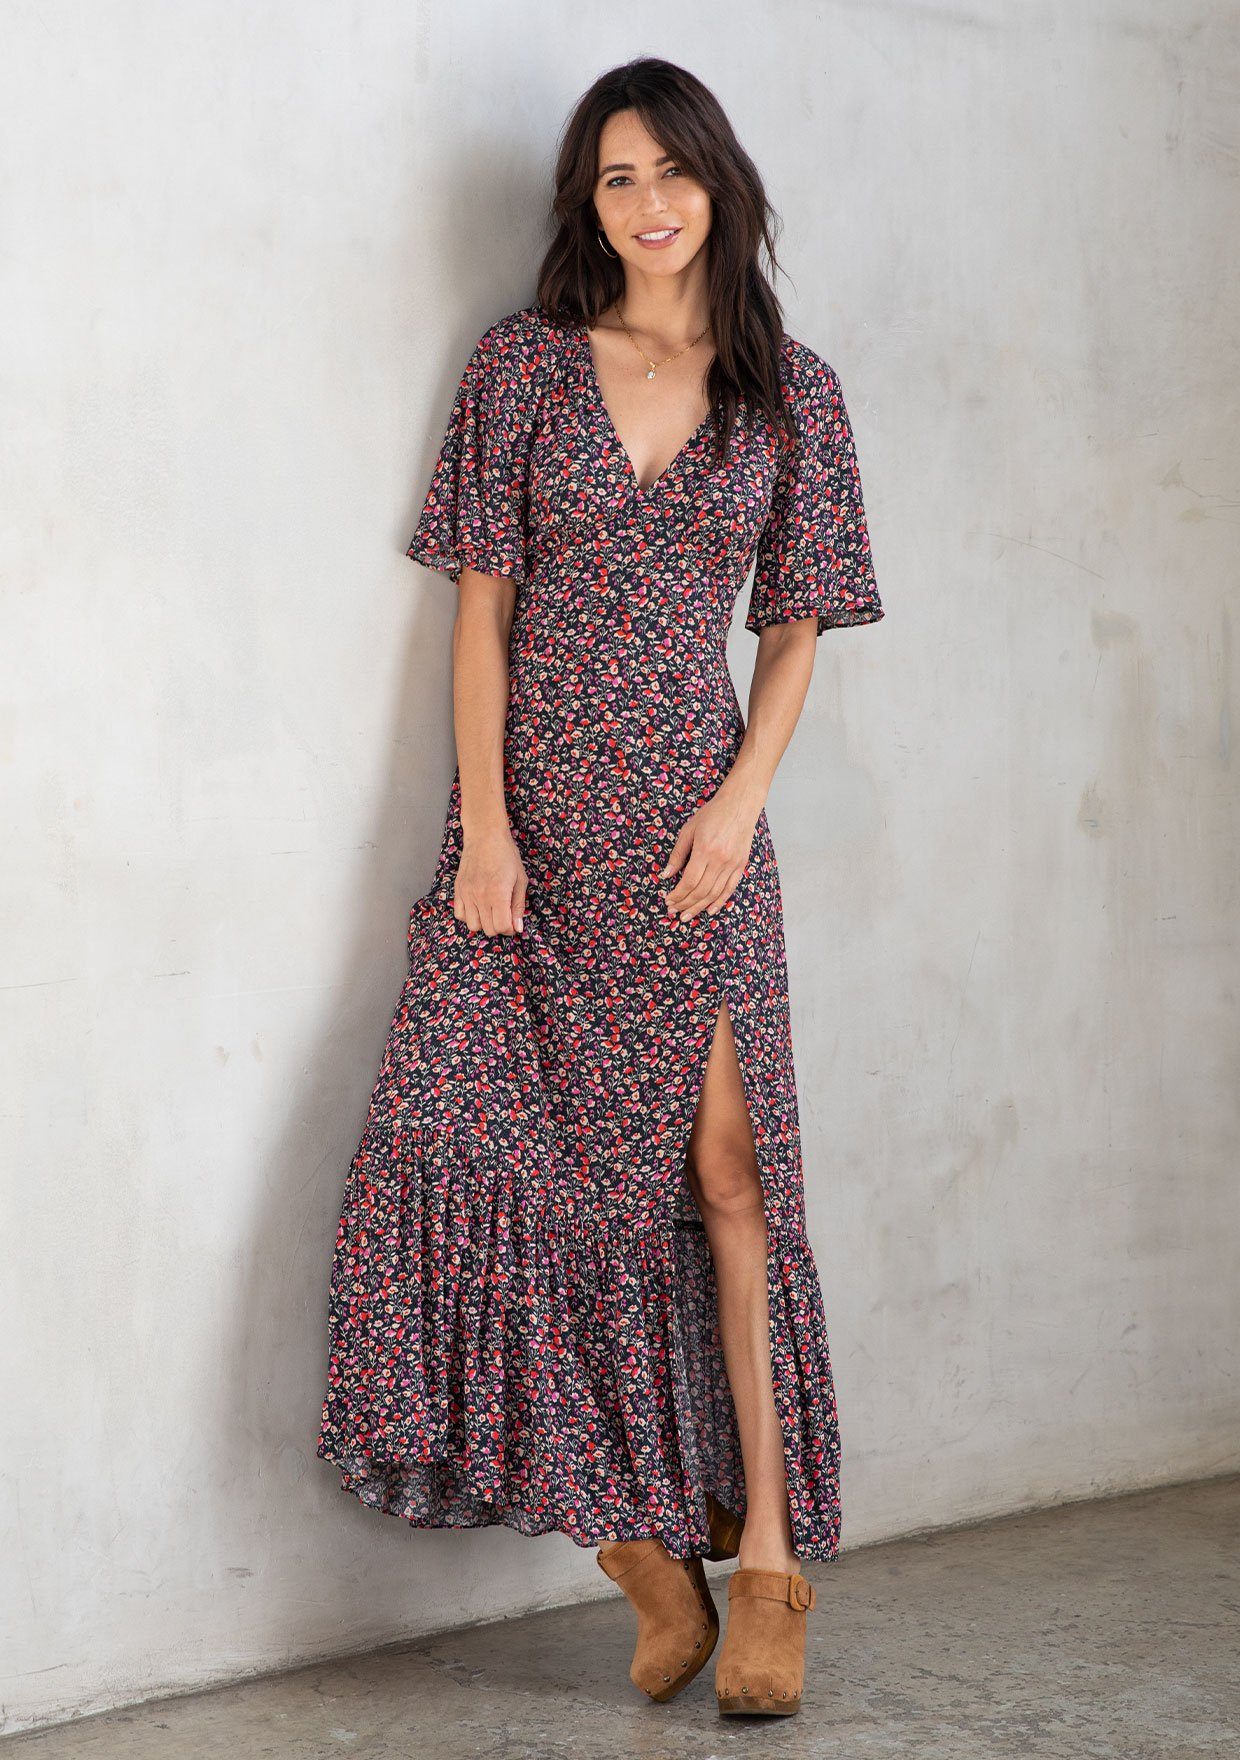 [Color: Black/Fuchsia] A model wearing a timeless flowy bohemian maxi dress in a black and fuchsia ditsy floral print. With short flutter sleeves, a deep v neckline, and a leg baring side slit.